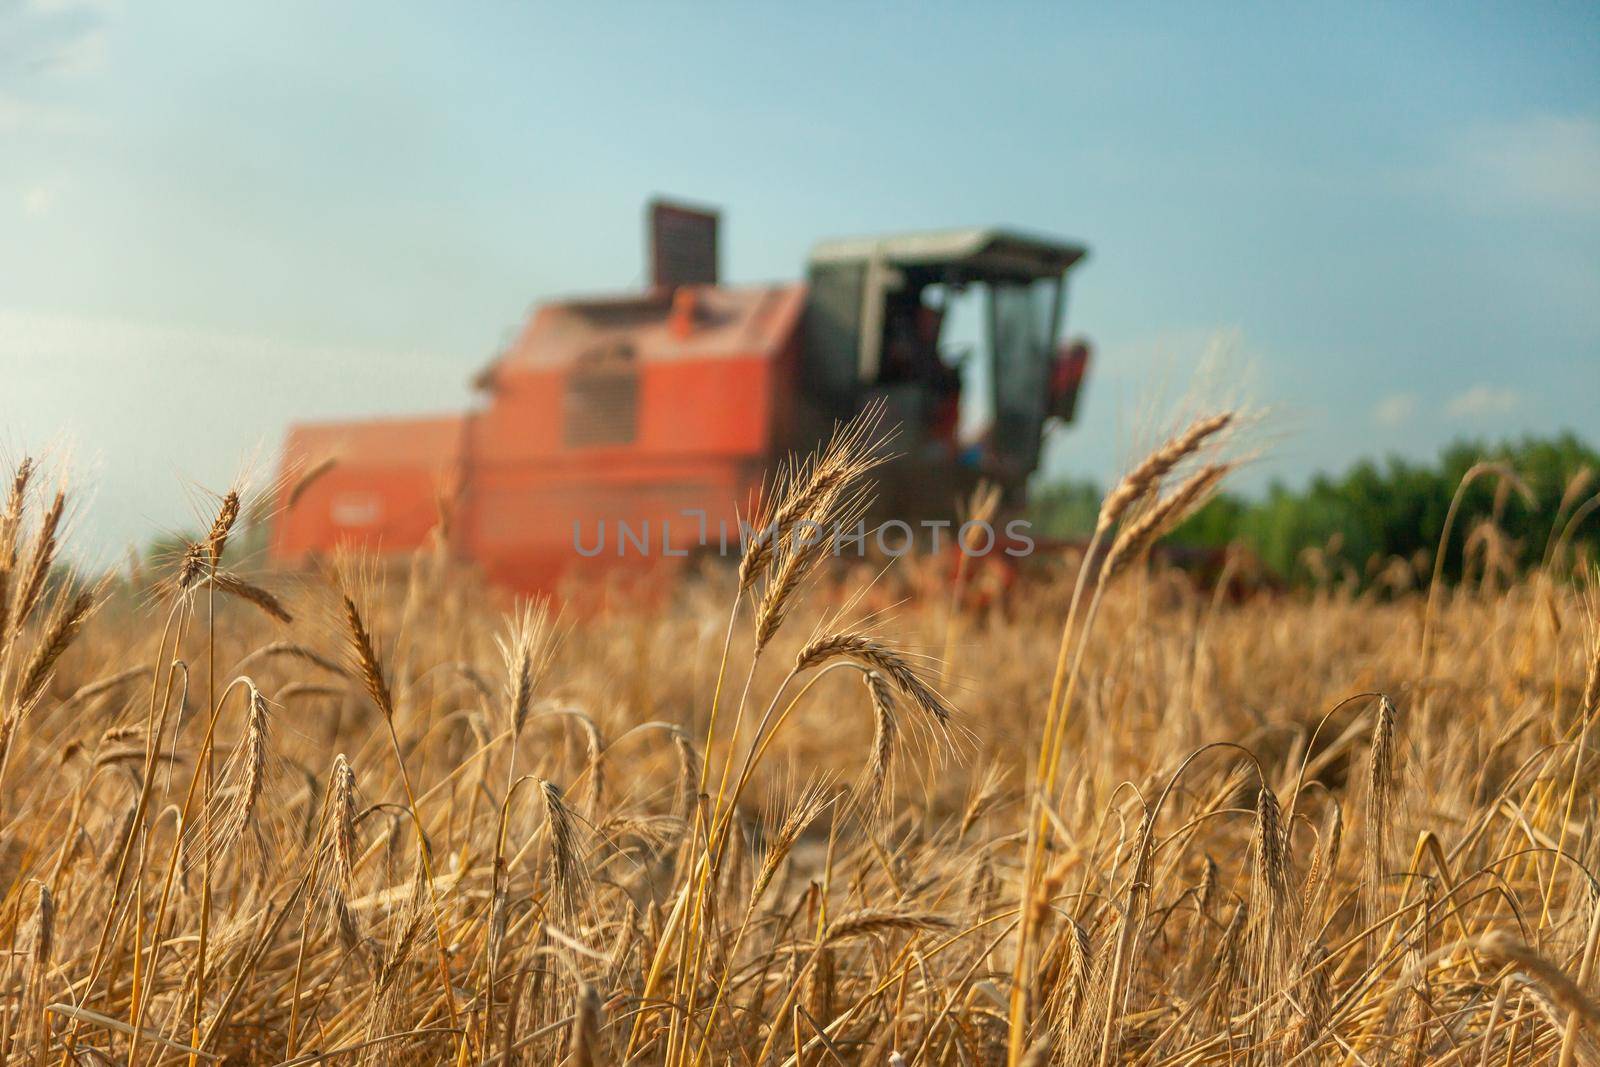 Field with grain and combine harvester in the background, summer rural view